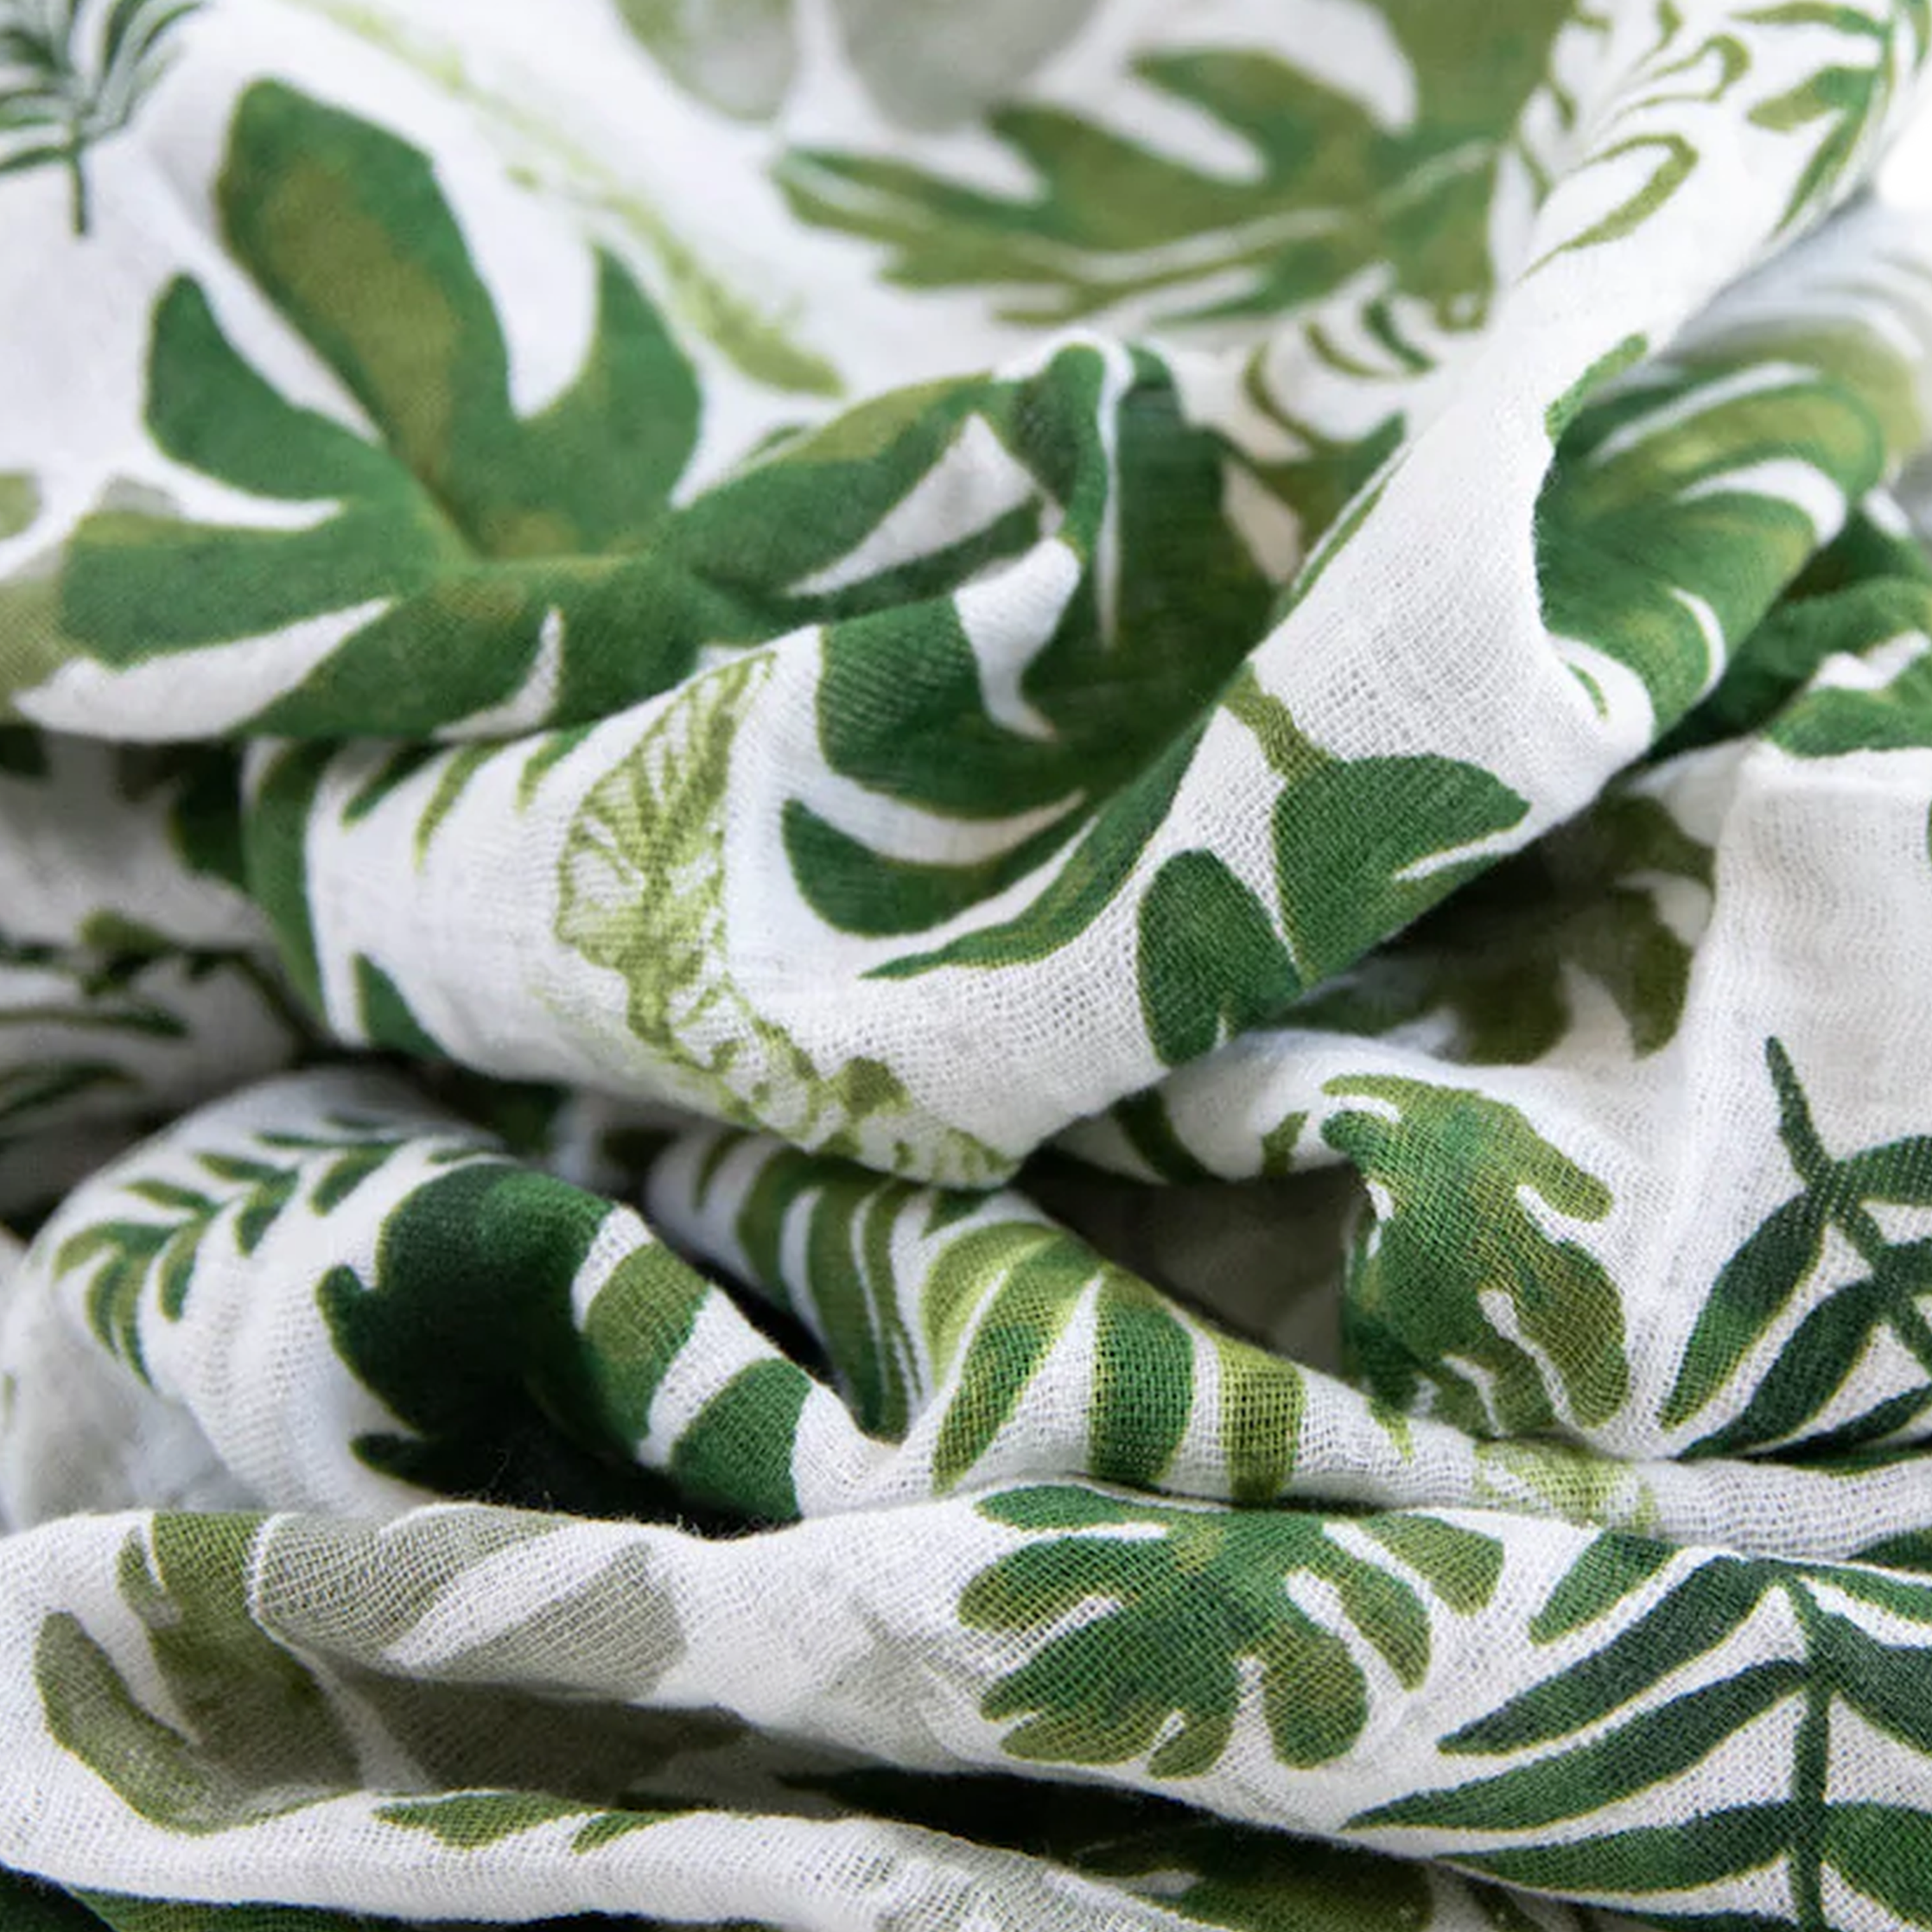 Muslin Fabric | 60'' Wide x Sold by Yard | Cotton | Unbleached | White |  Printing | Lining | Upholstery | Clothing | Sewing Pattern | Craft